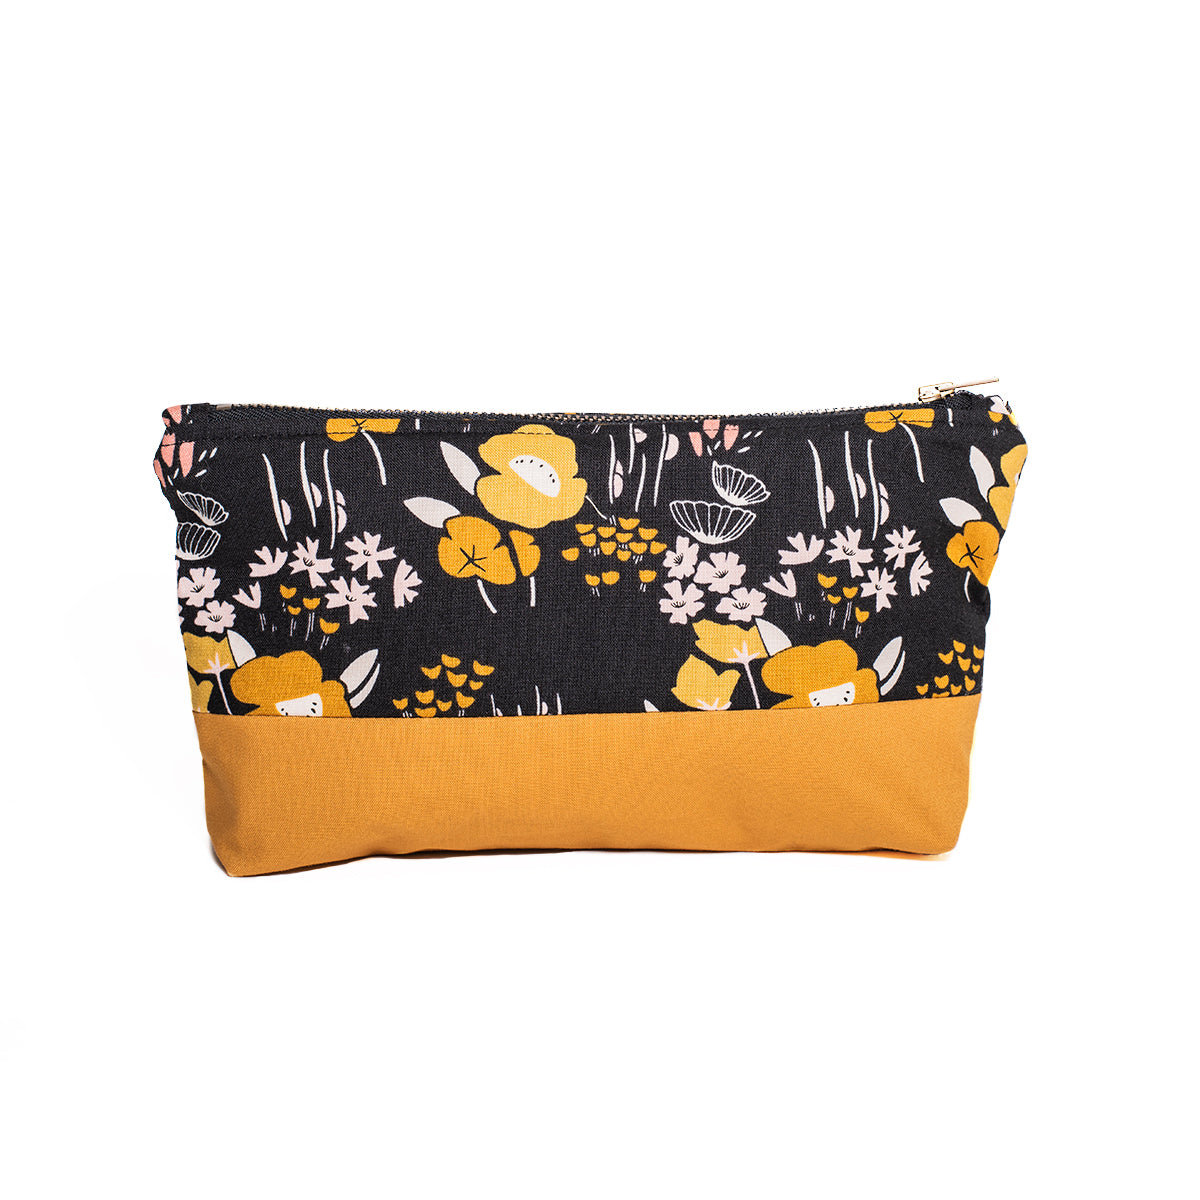 100% cotton zip case in black and yellow colour block featuring illustration pattern of white and yellow wild flowers